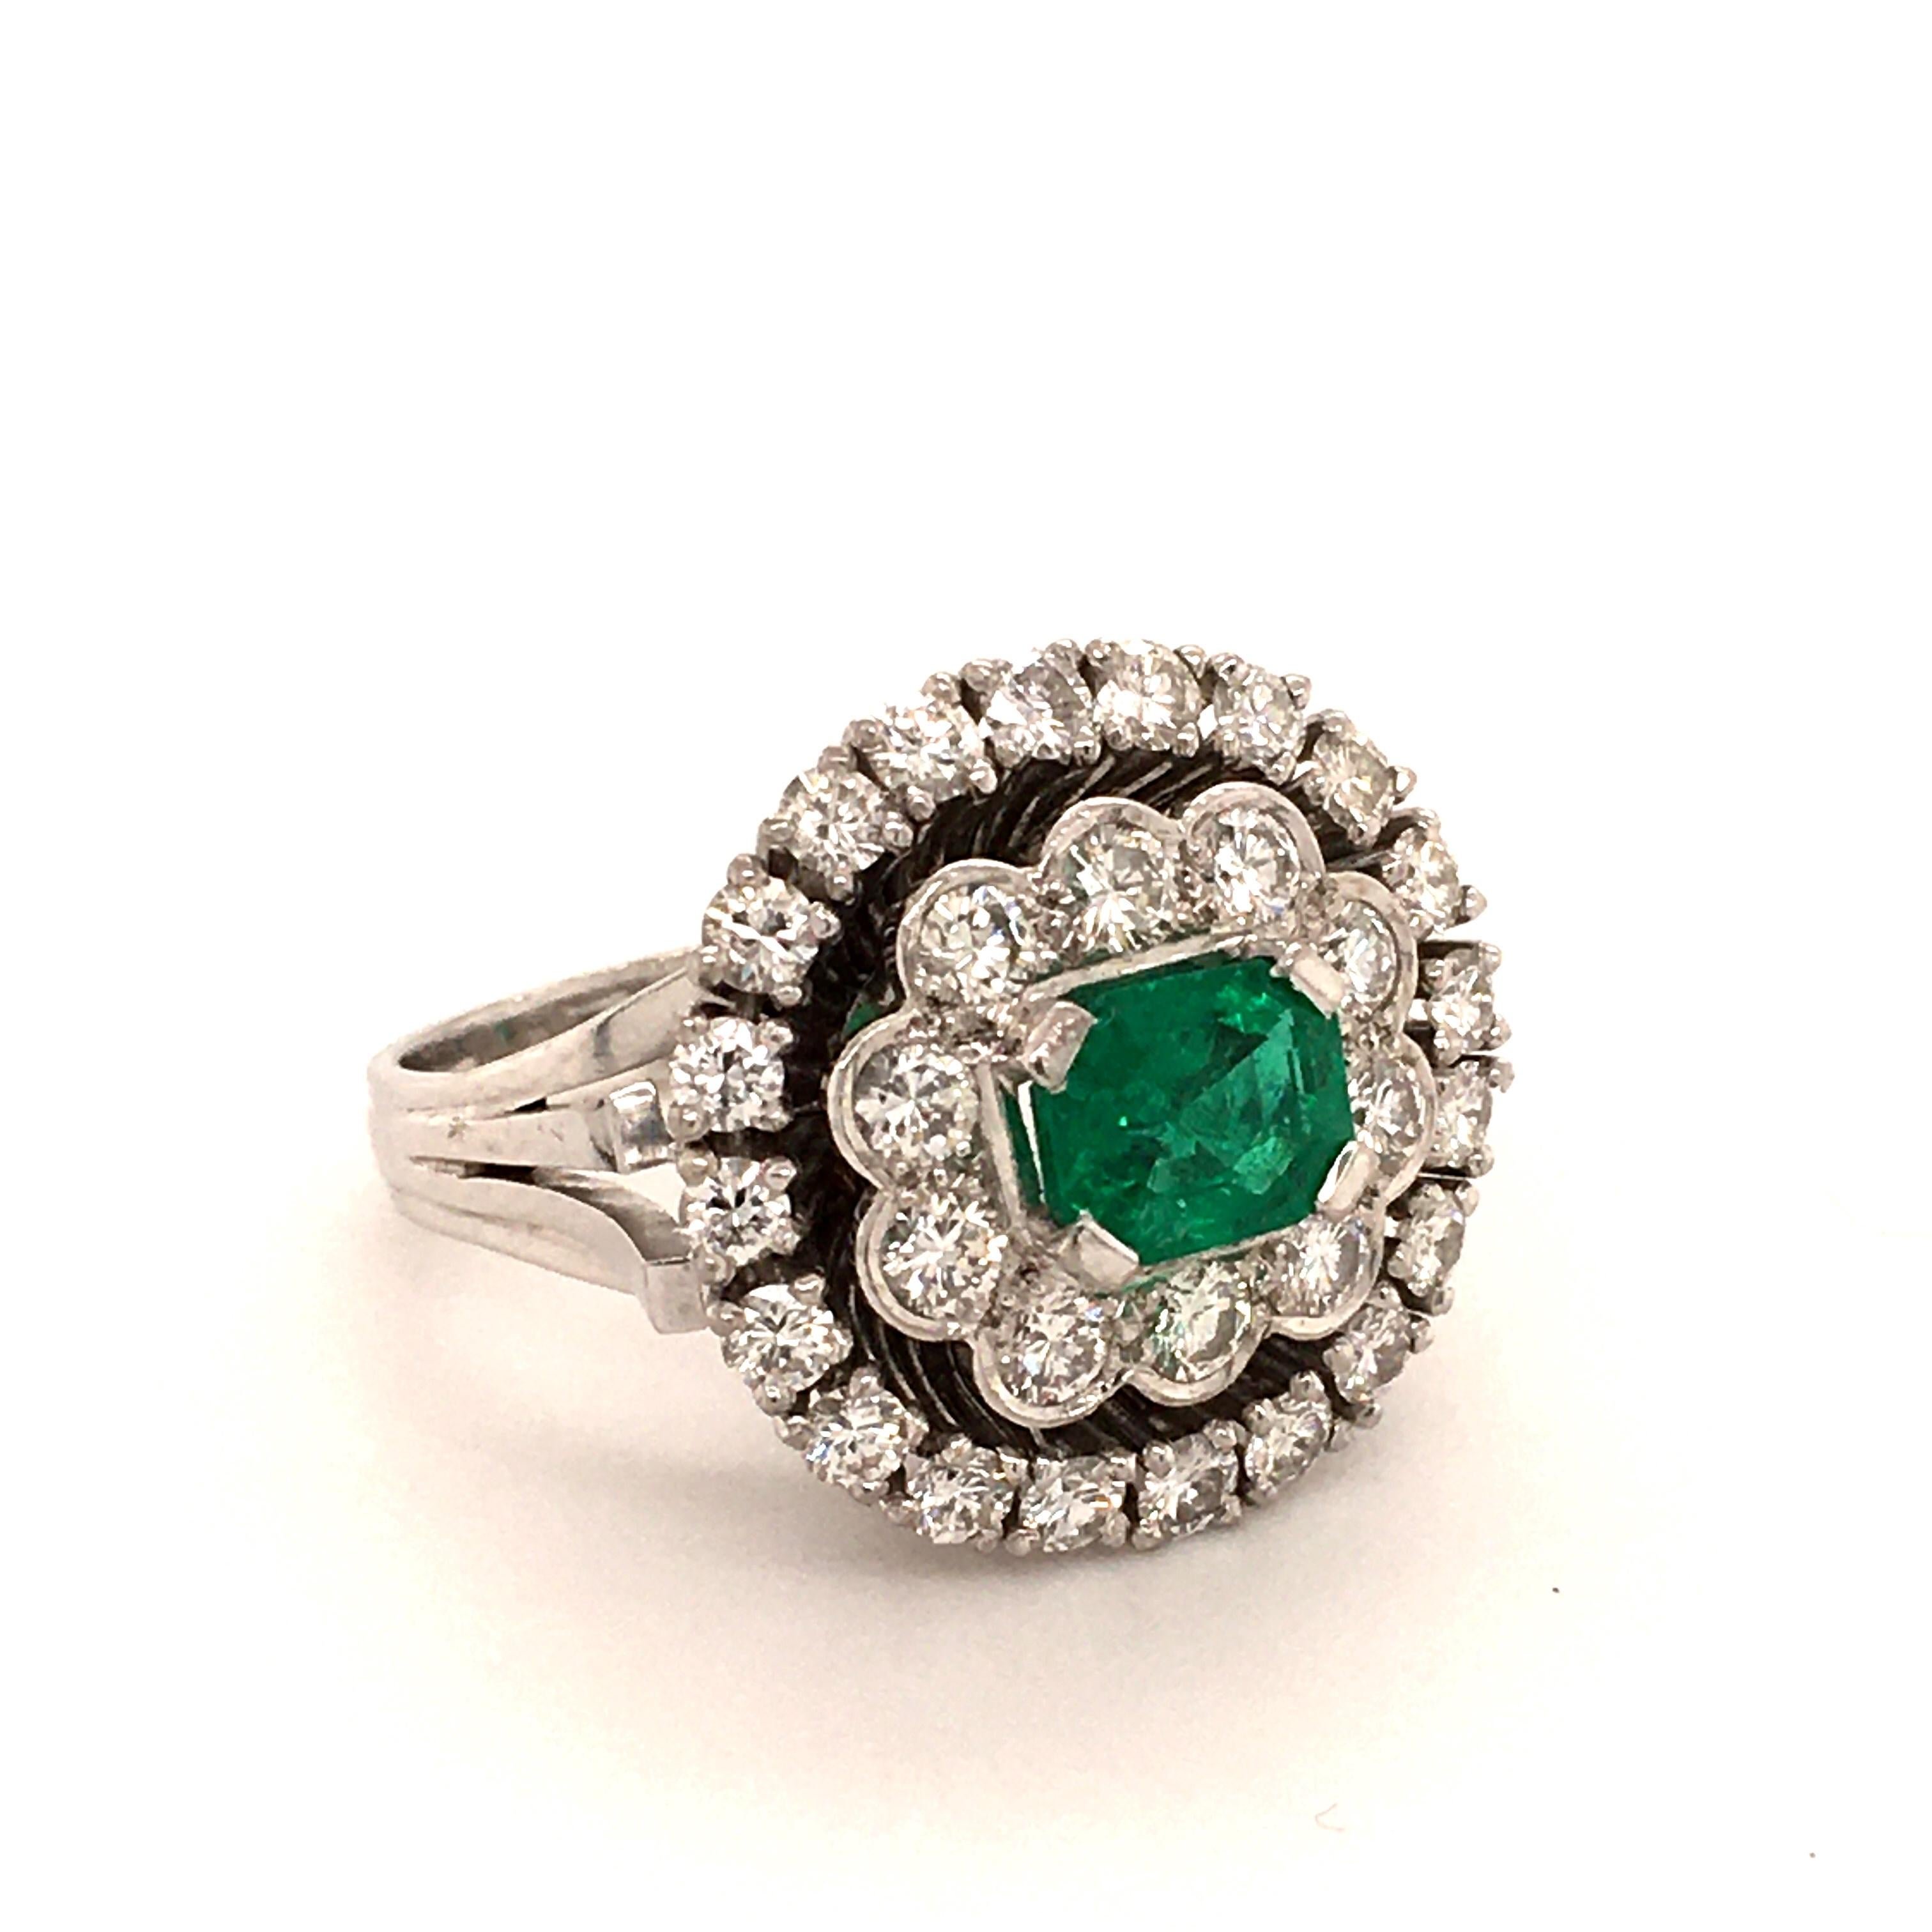 This charming ring features an octagonal-cut emerald of approximately 1.40 carats. Surrounded by 30 brilliant-cut diamonds of G/H colour and vs clarity, total weight approximately 1.60 carats.

Ring size: 56 EU / 7.5 US
Hallmark: 750 for 18 karat